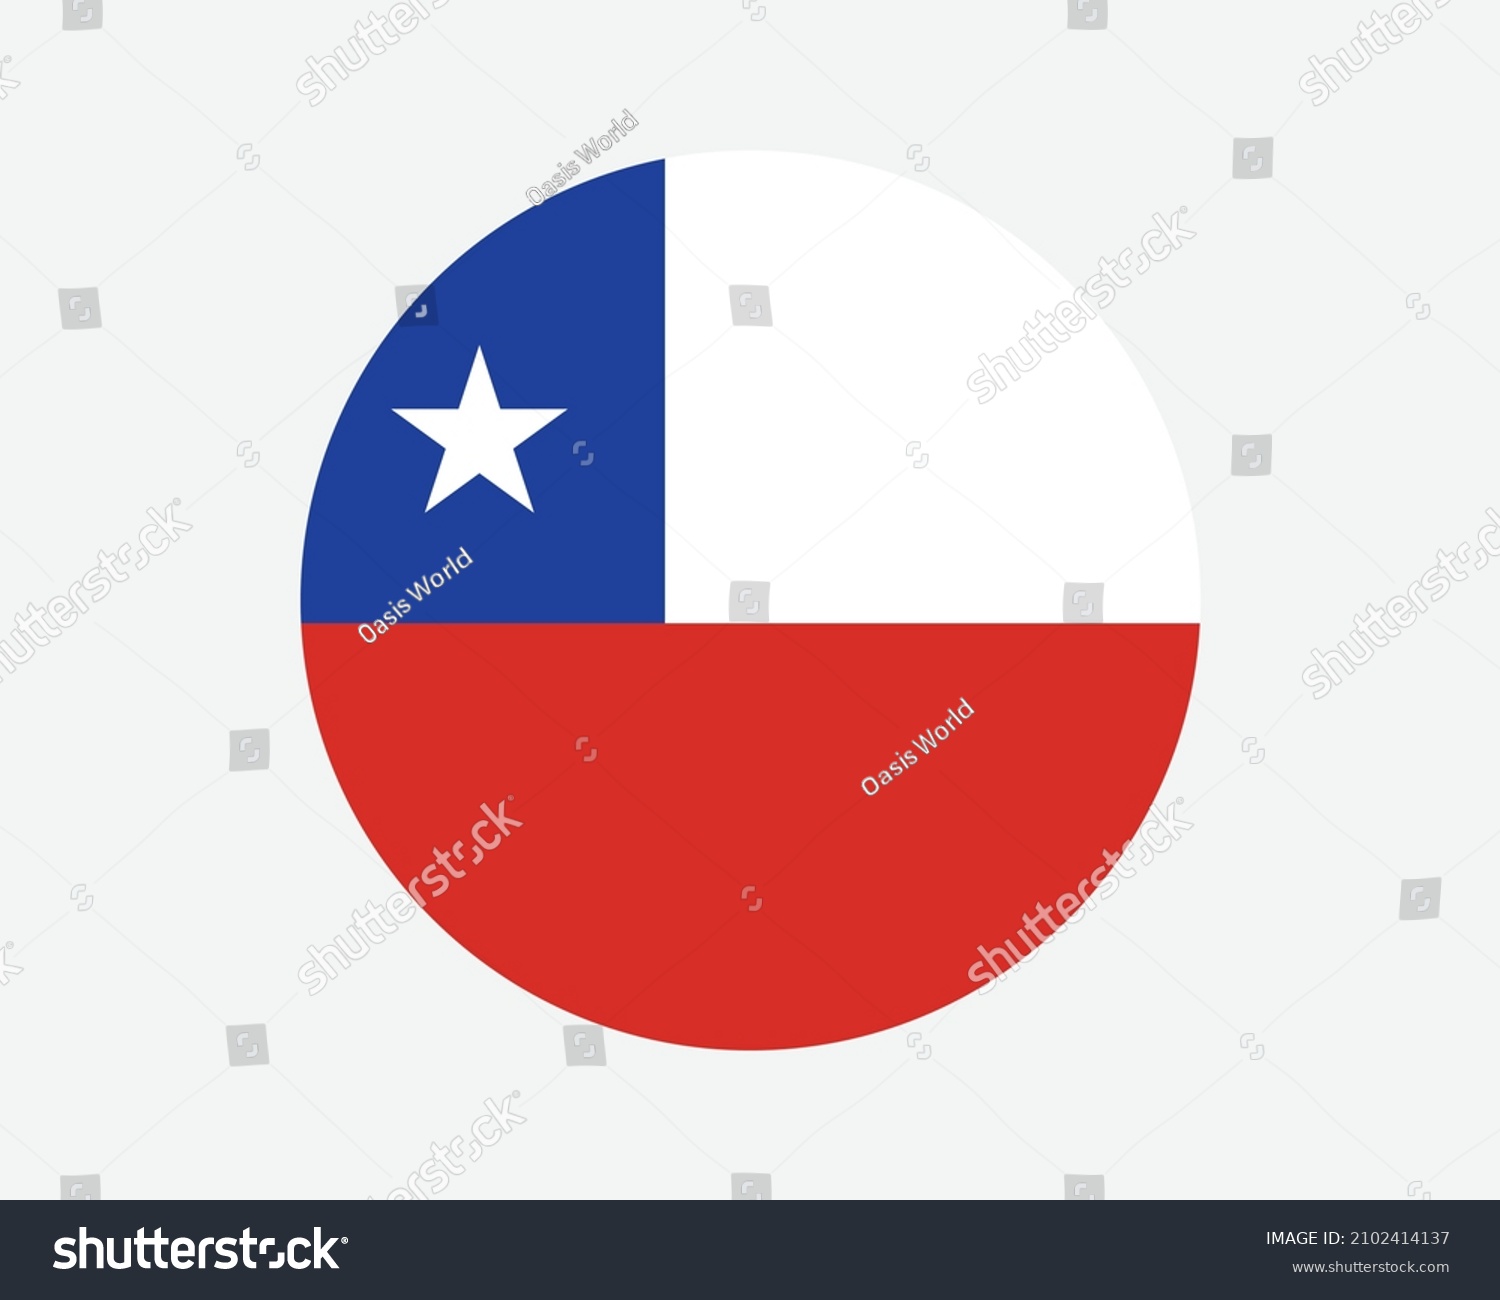 SVG of Chile Round Country Flag. Circular Chilean National Flag. Republic of Chile Circle Shape Button Banner. EPS Vector Illustration. svg